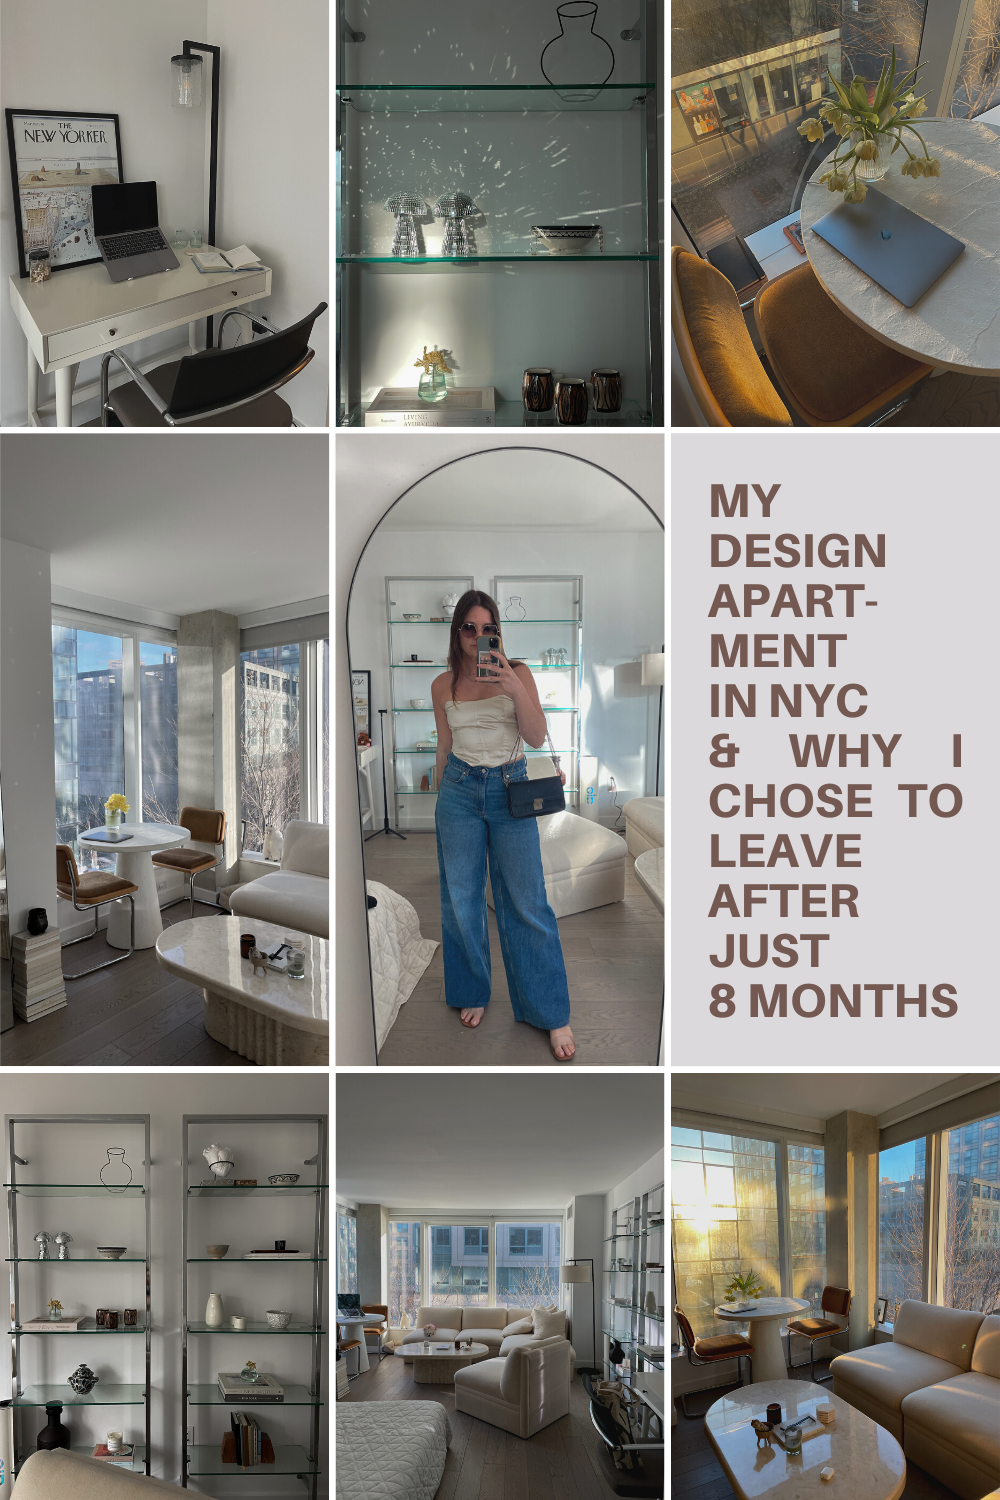 My NYC Apartment, and Why I’m Leaving The City After Just 8 Months | www.aestheticstraveler.com Travel & Design Editorial | IG: @itskarenalexandra